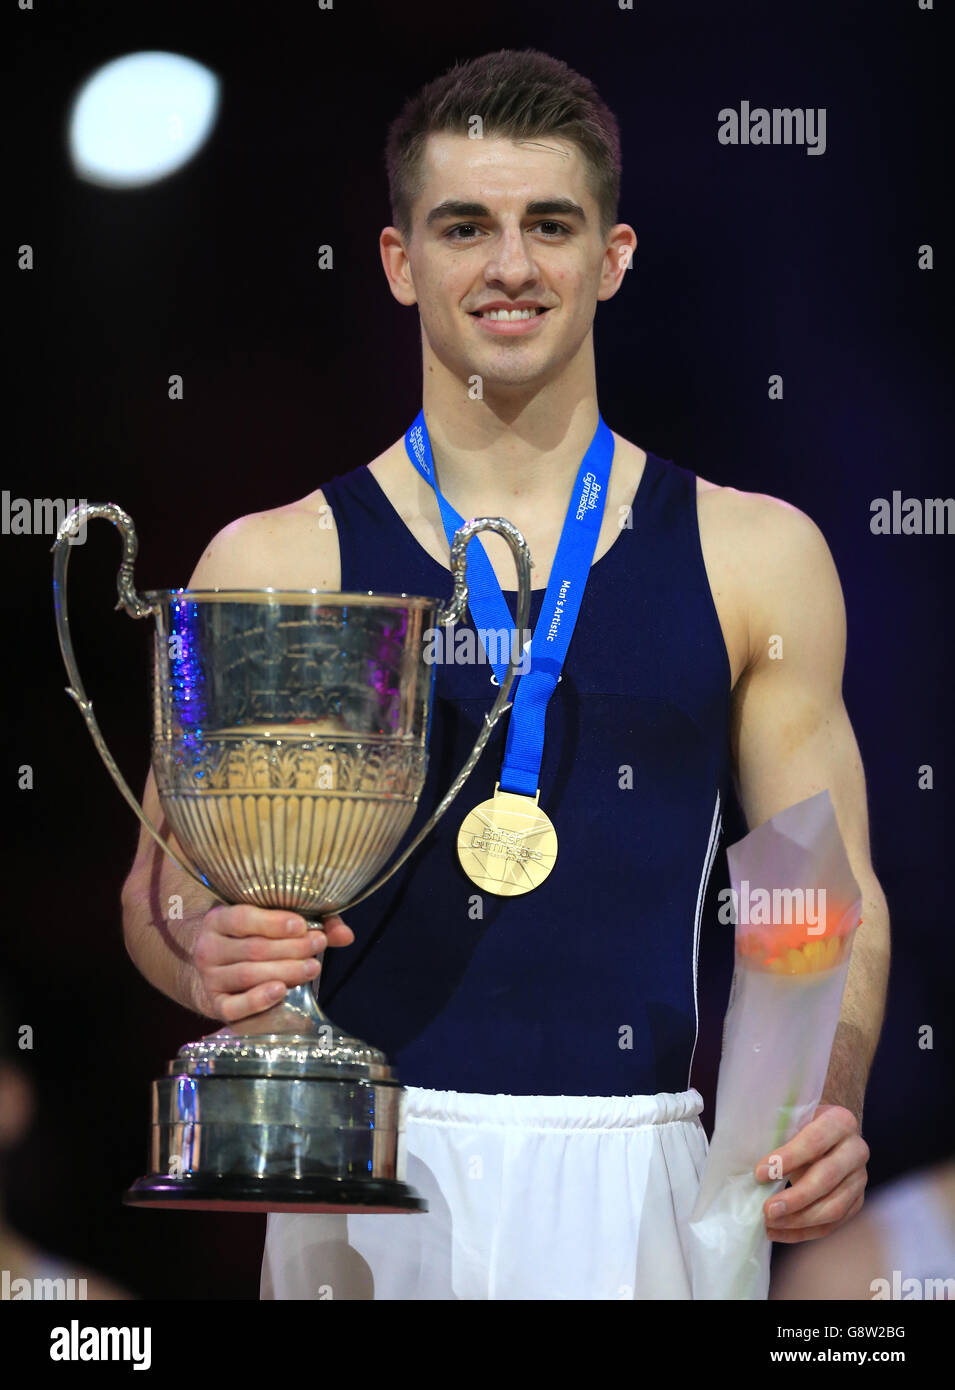 Max Whitlock wins the MAG Senior title during the Artistic Gymnastics British Championships 2016 at the Echo Arena, Liverpool. Stock Photo